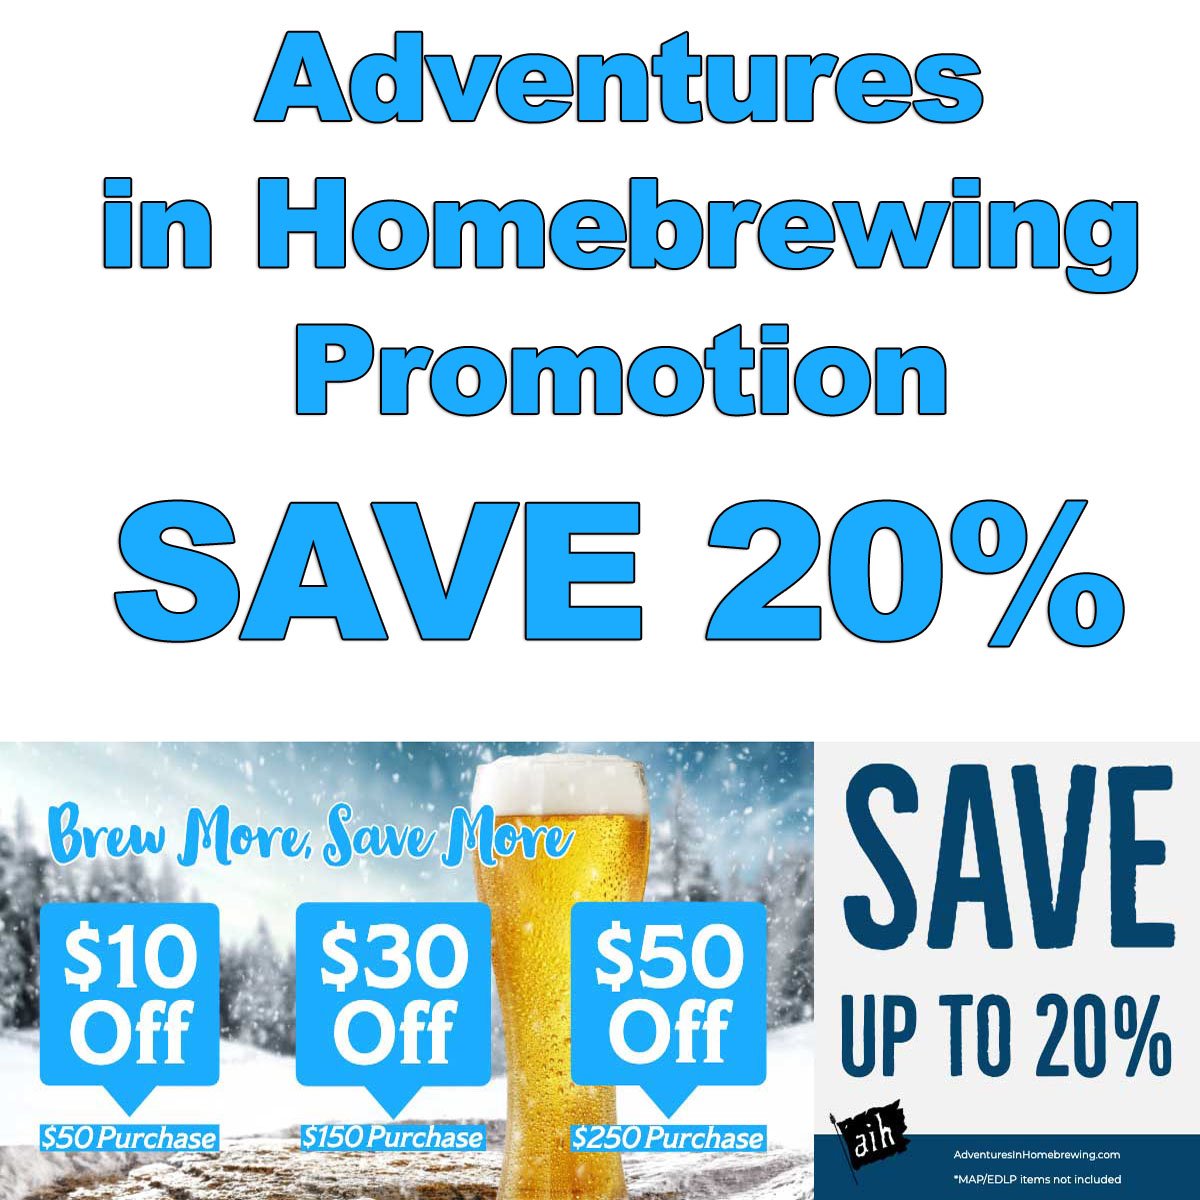 Save Up To 20% At Adventures in Homebrewing